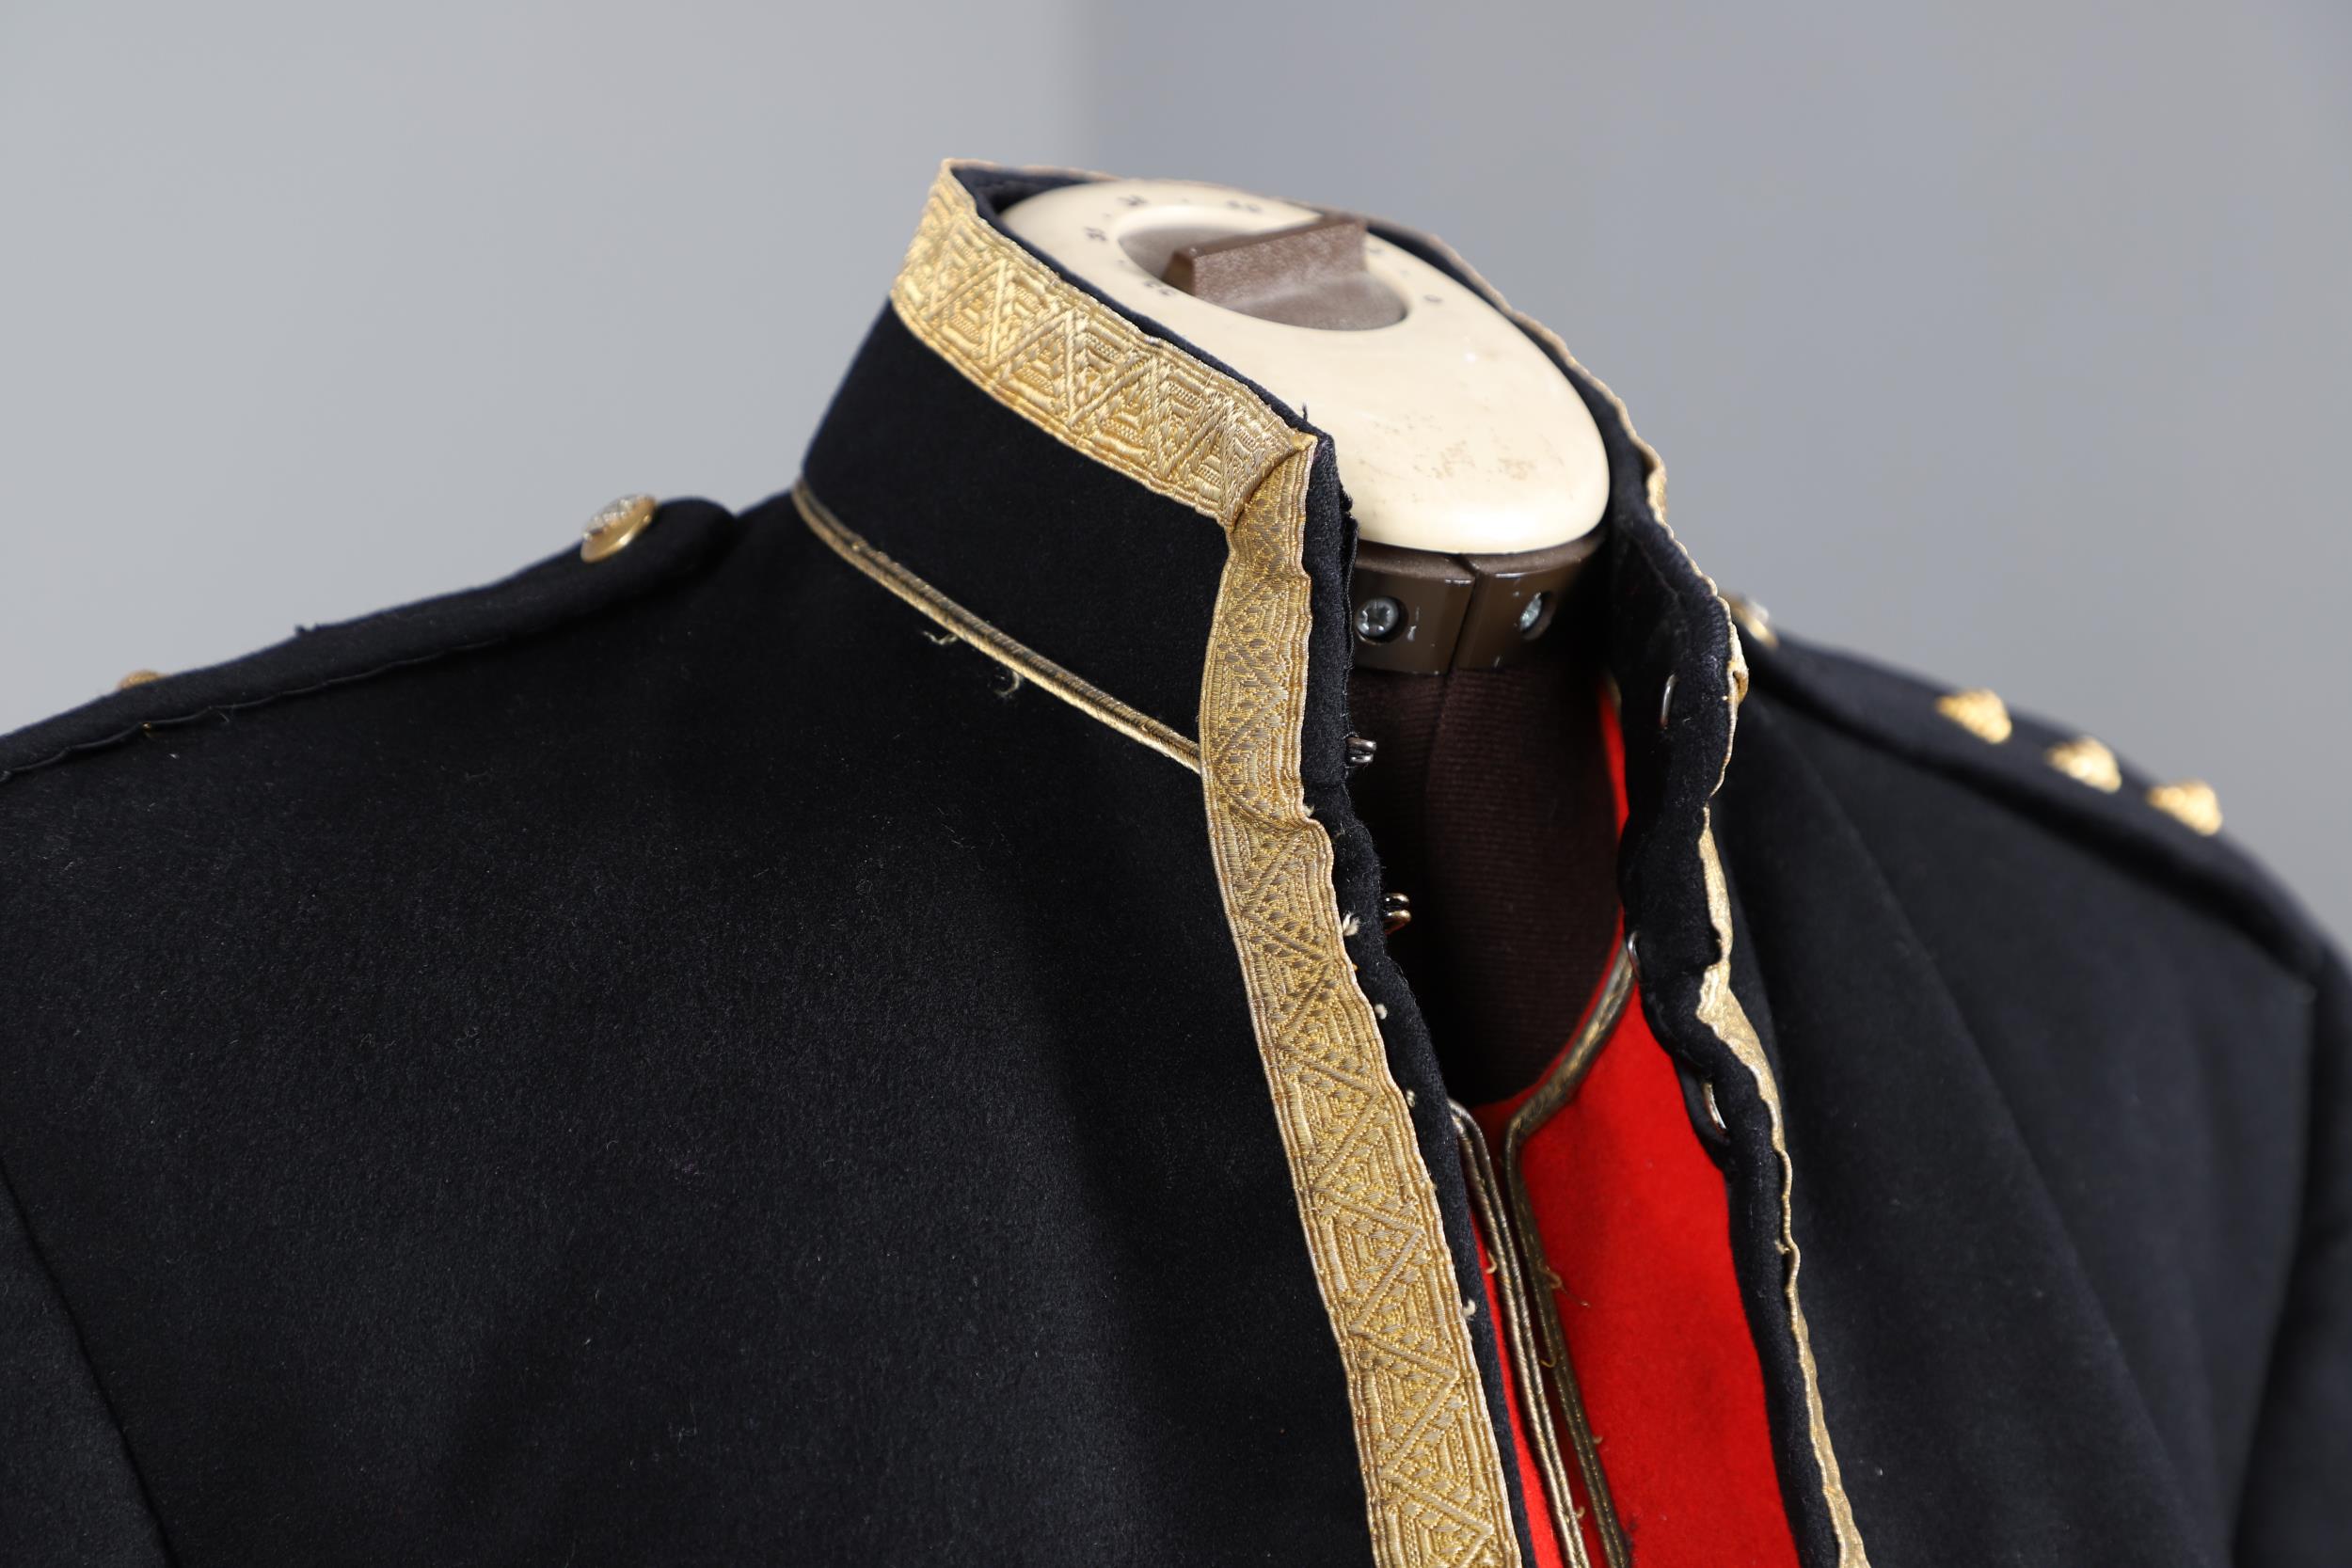 A POST SECOND WORLD WAR MESS JACKET AND BLUES UNIFORM FOR THE 15/19TH HUSSARS. - Image 17 of 34